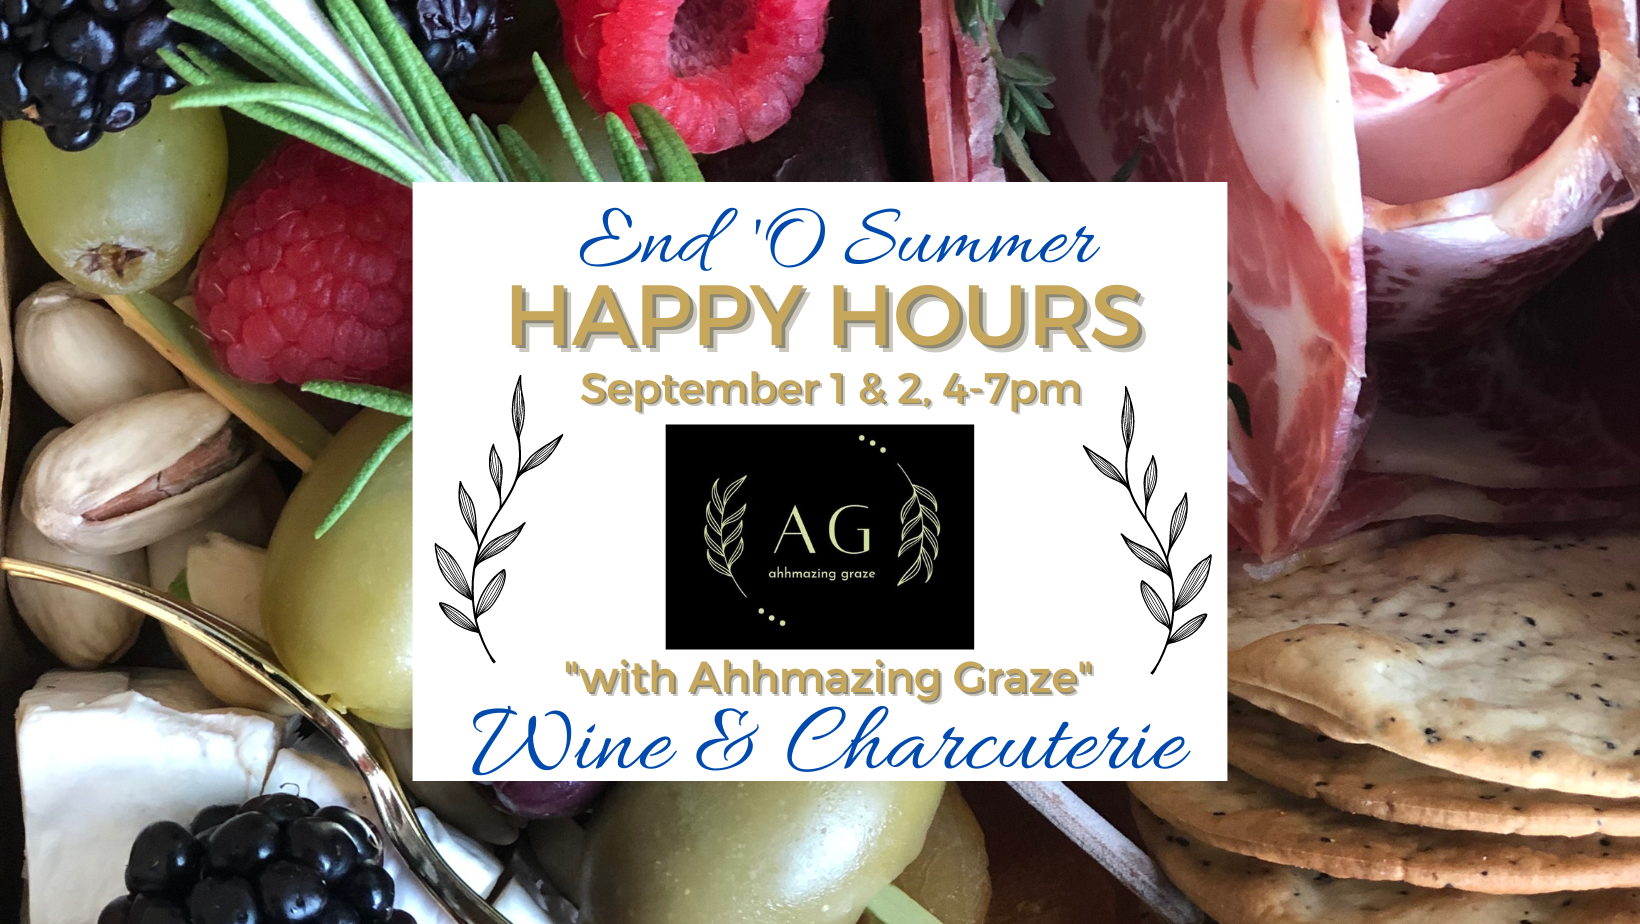 Promo piece summarizing date/time of "end 'O Summer Charcuterie & Wine Pairing